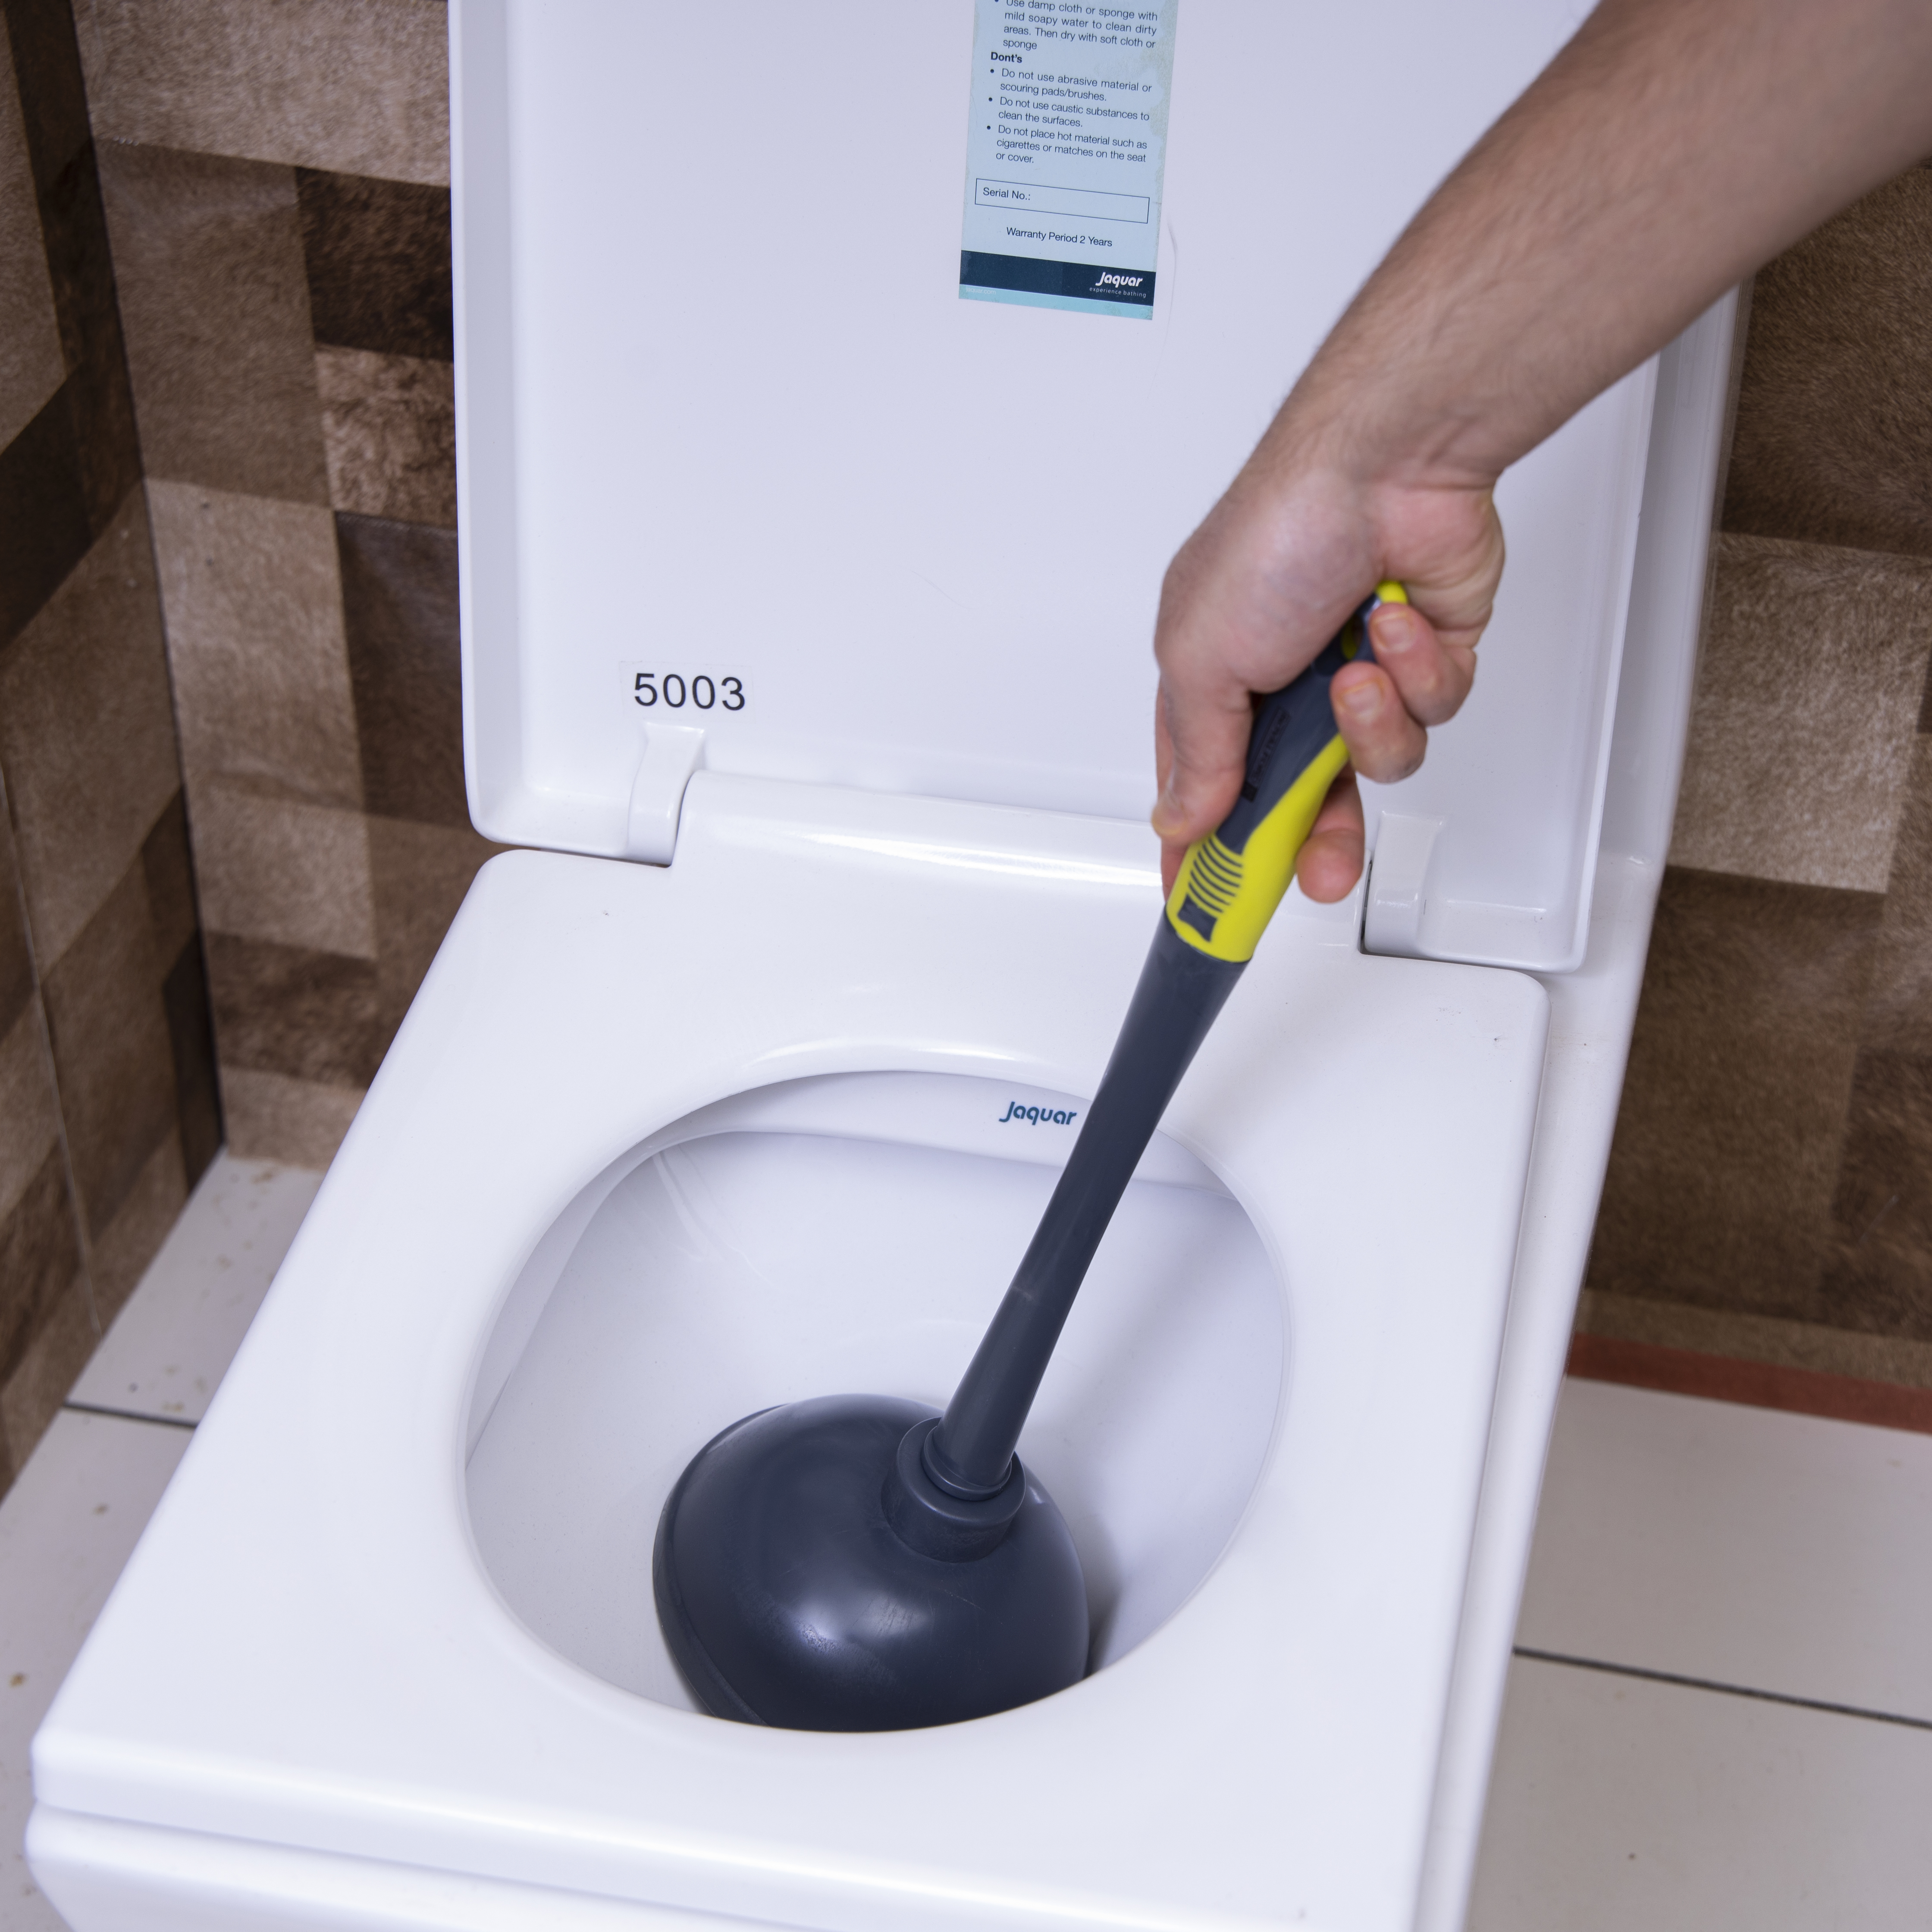 Heavy Duty Convenient Handle Convenient Handle Easy to Clean Royalford Toilet Air Plunger Powerful Unblocker for General Use 